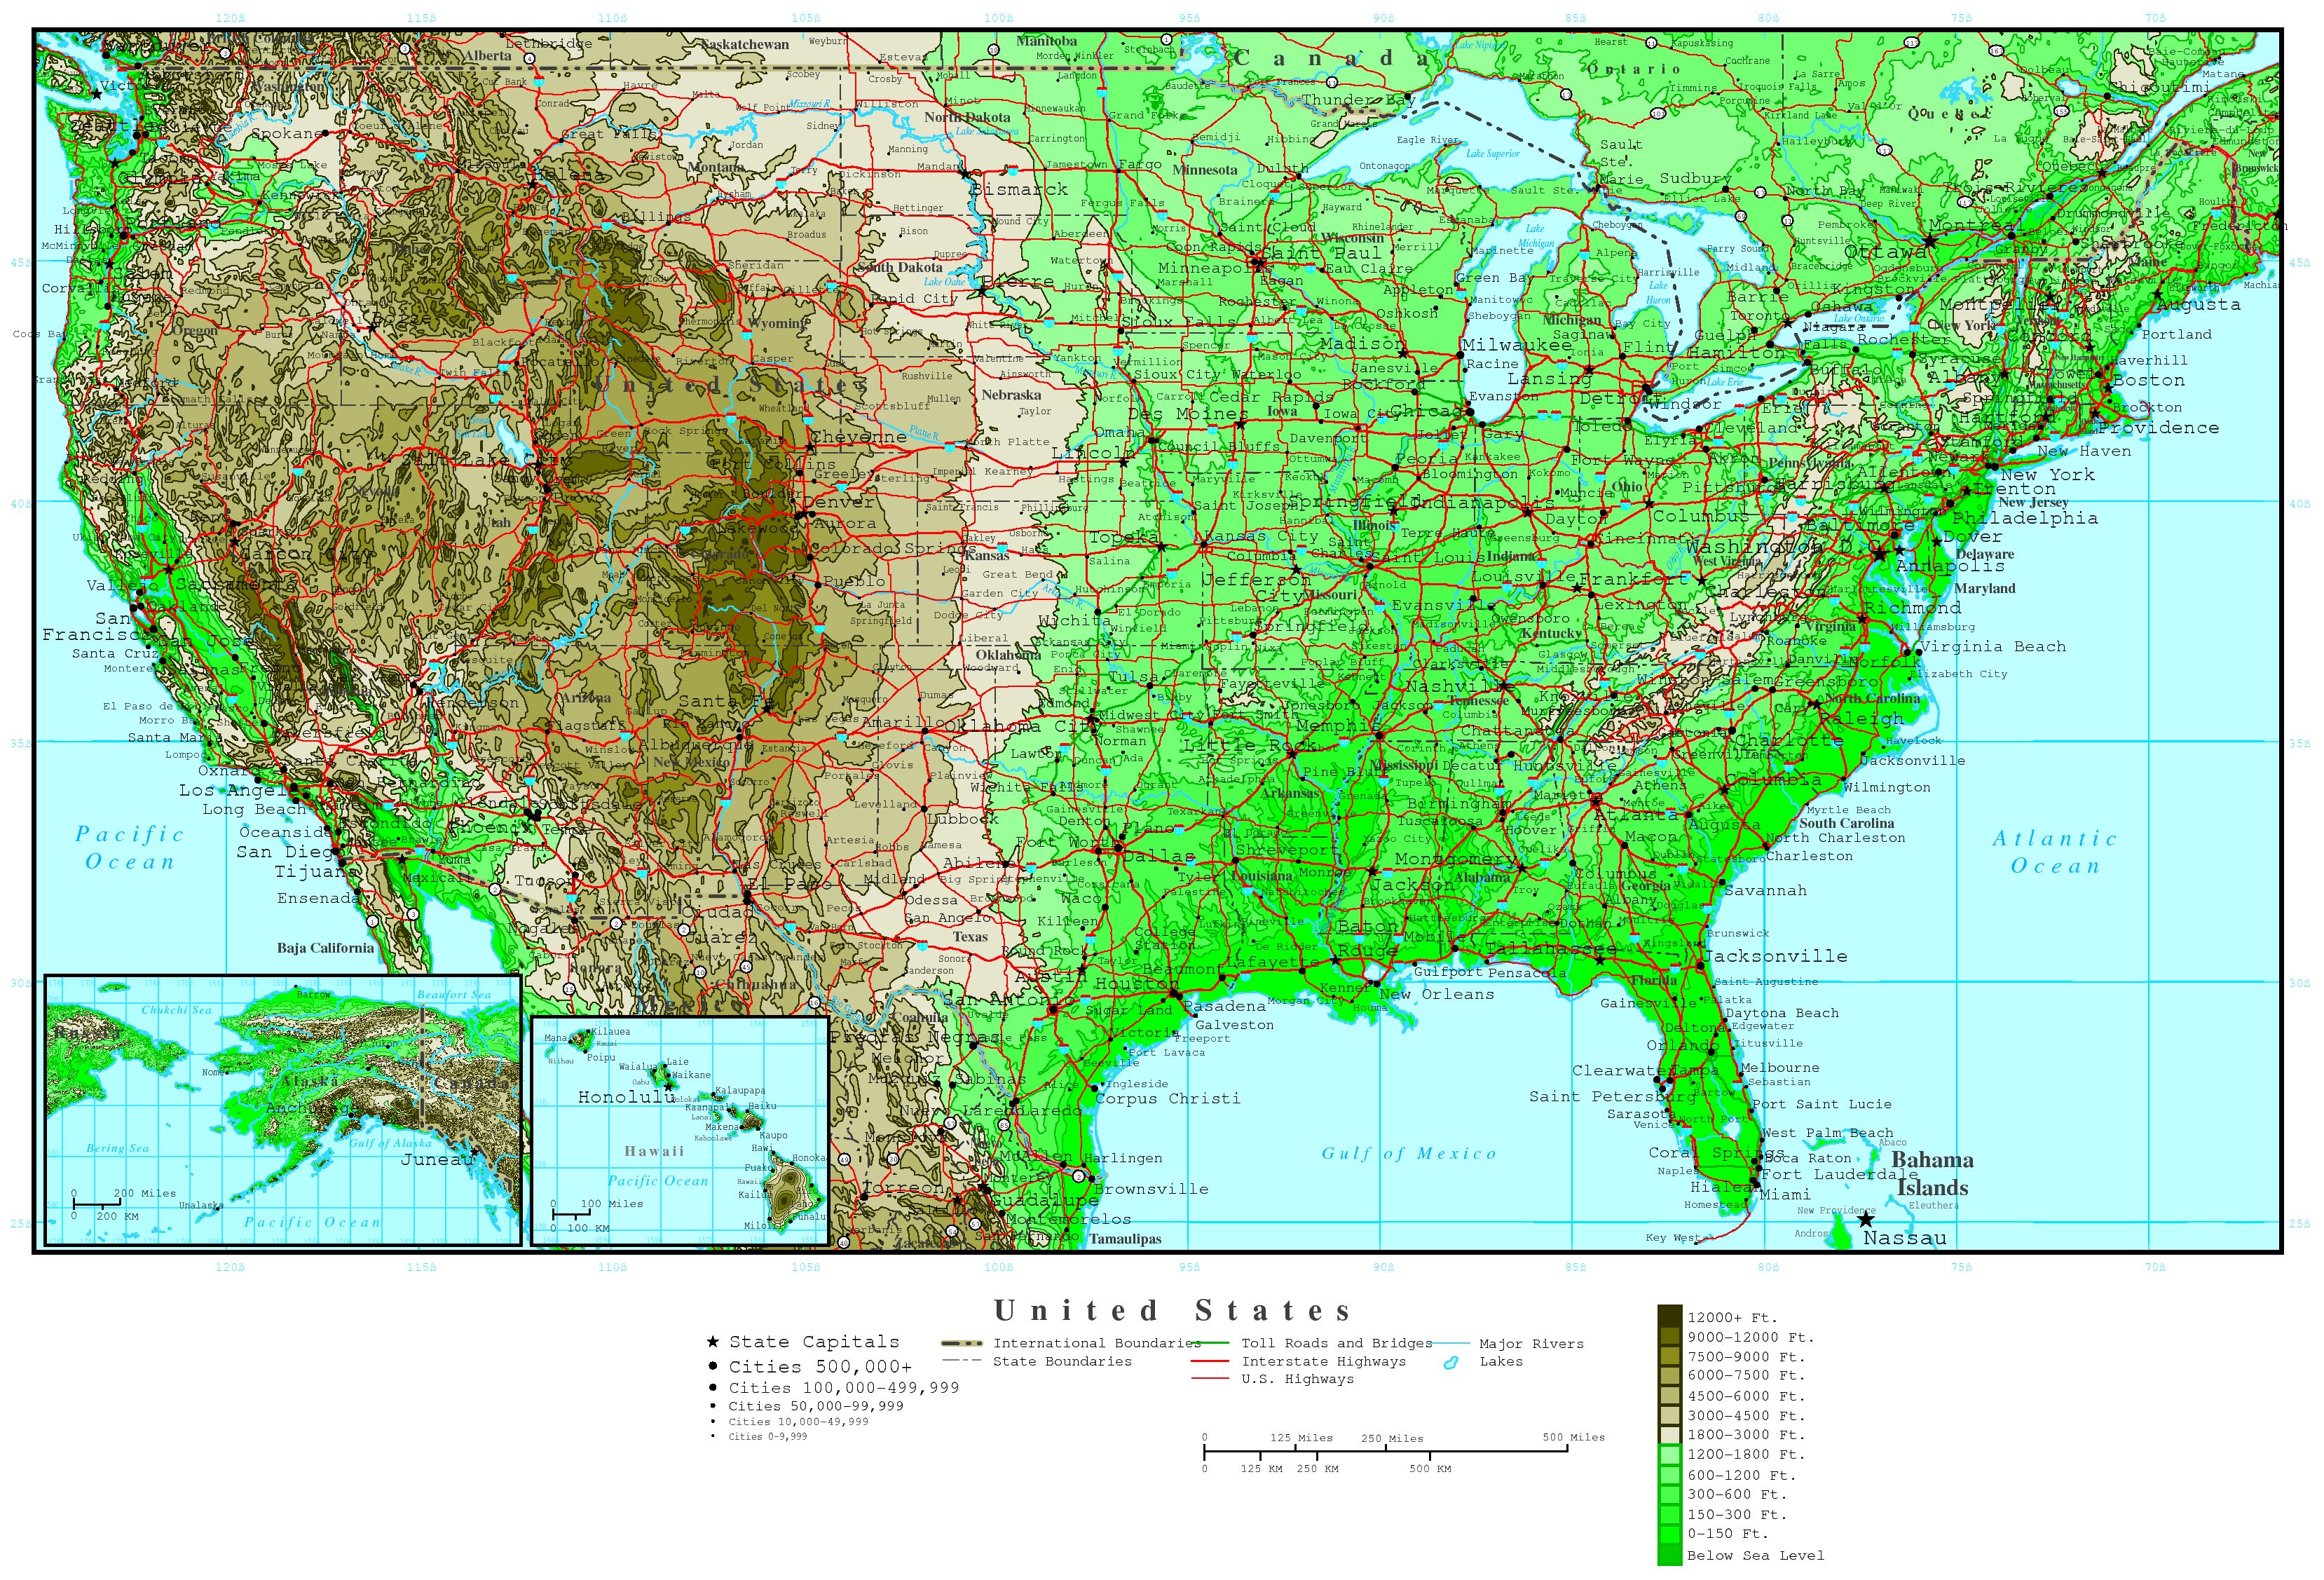 31-elevation-map-of-north-america-maps-database-source